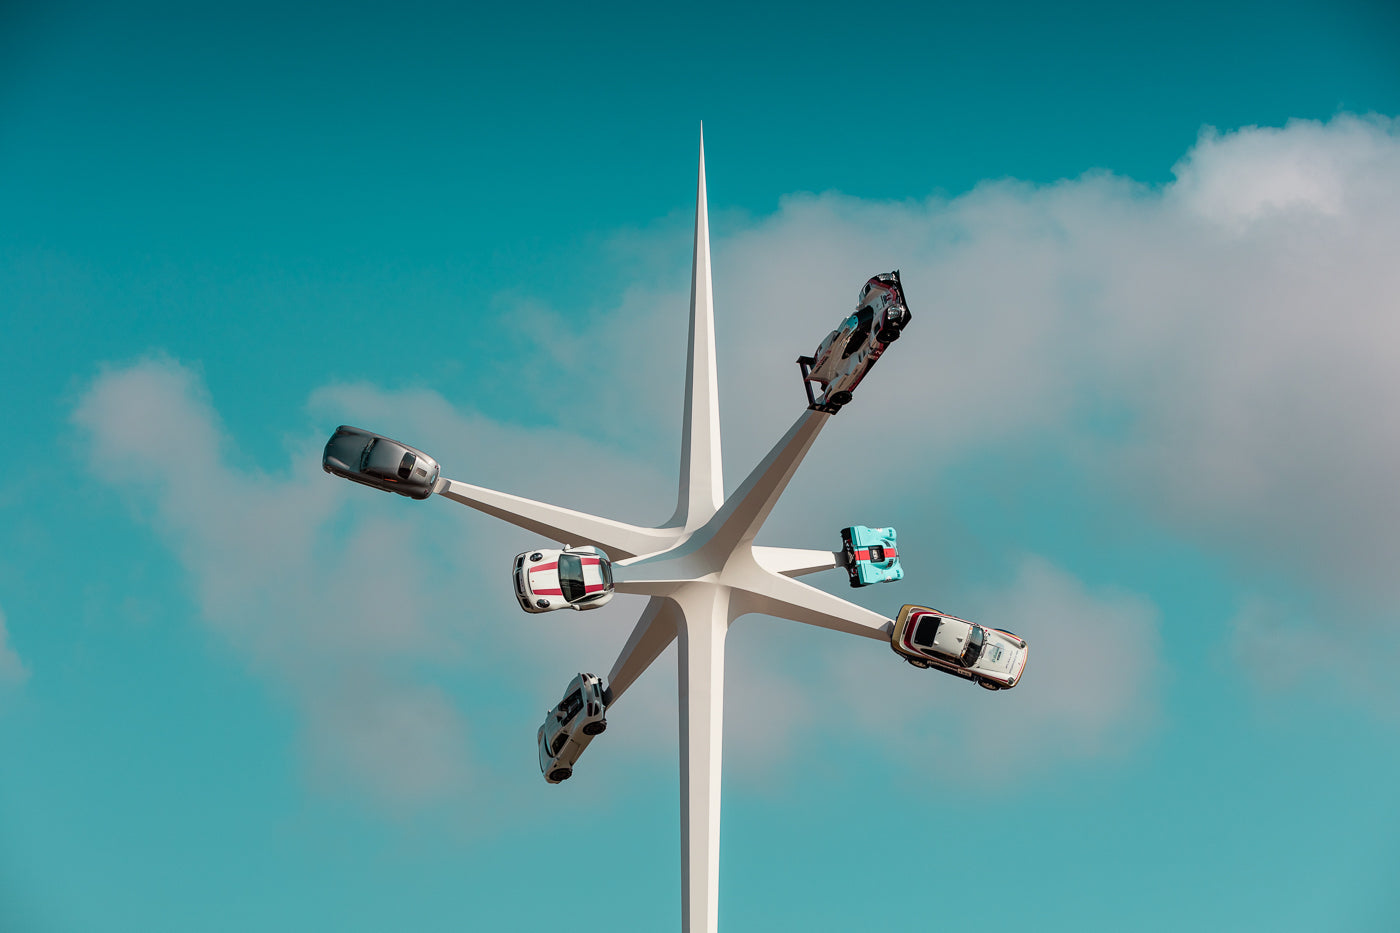 52 meters in the air, six legendary Porsche cars are hung up on a sculpture by artist Gerry Judah at Goodwood Festival of Speed. (Photo: Alex Lawrence – The White Wall 2018)